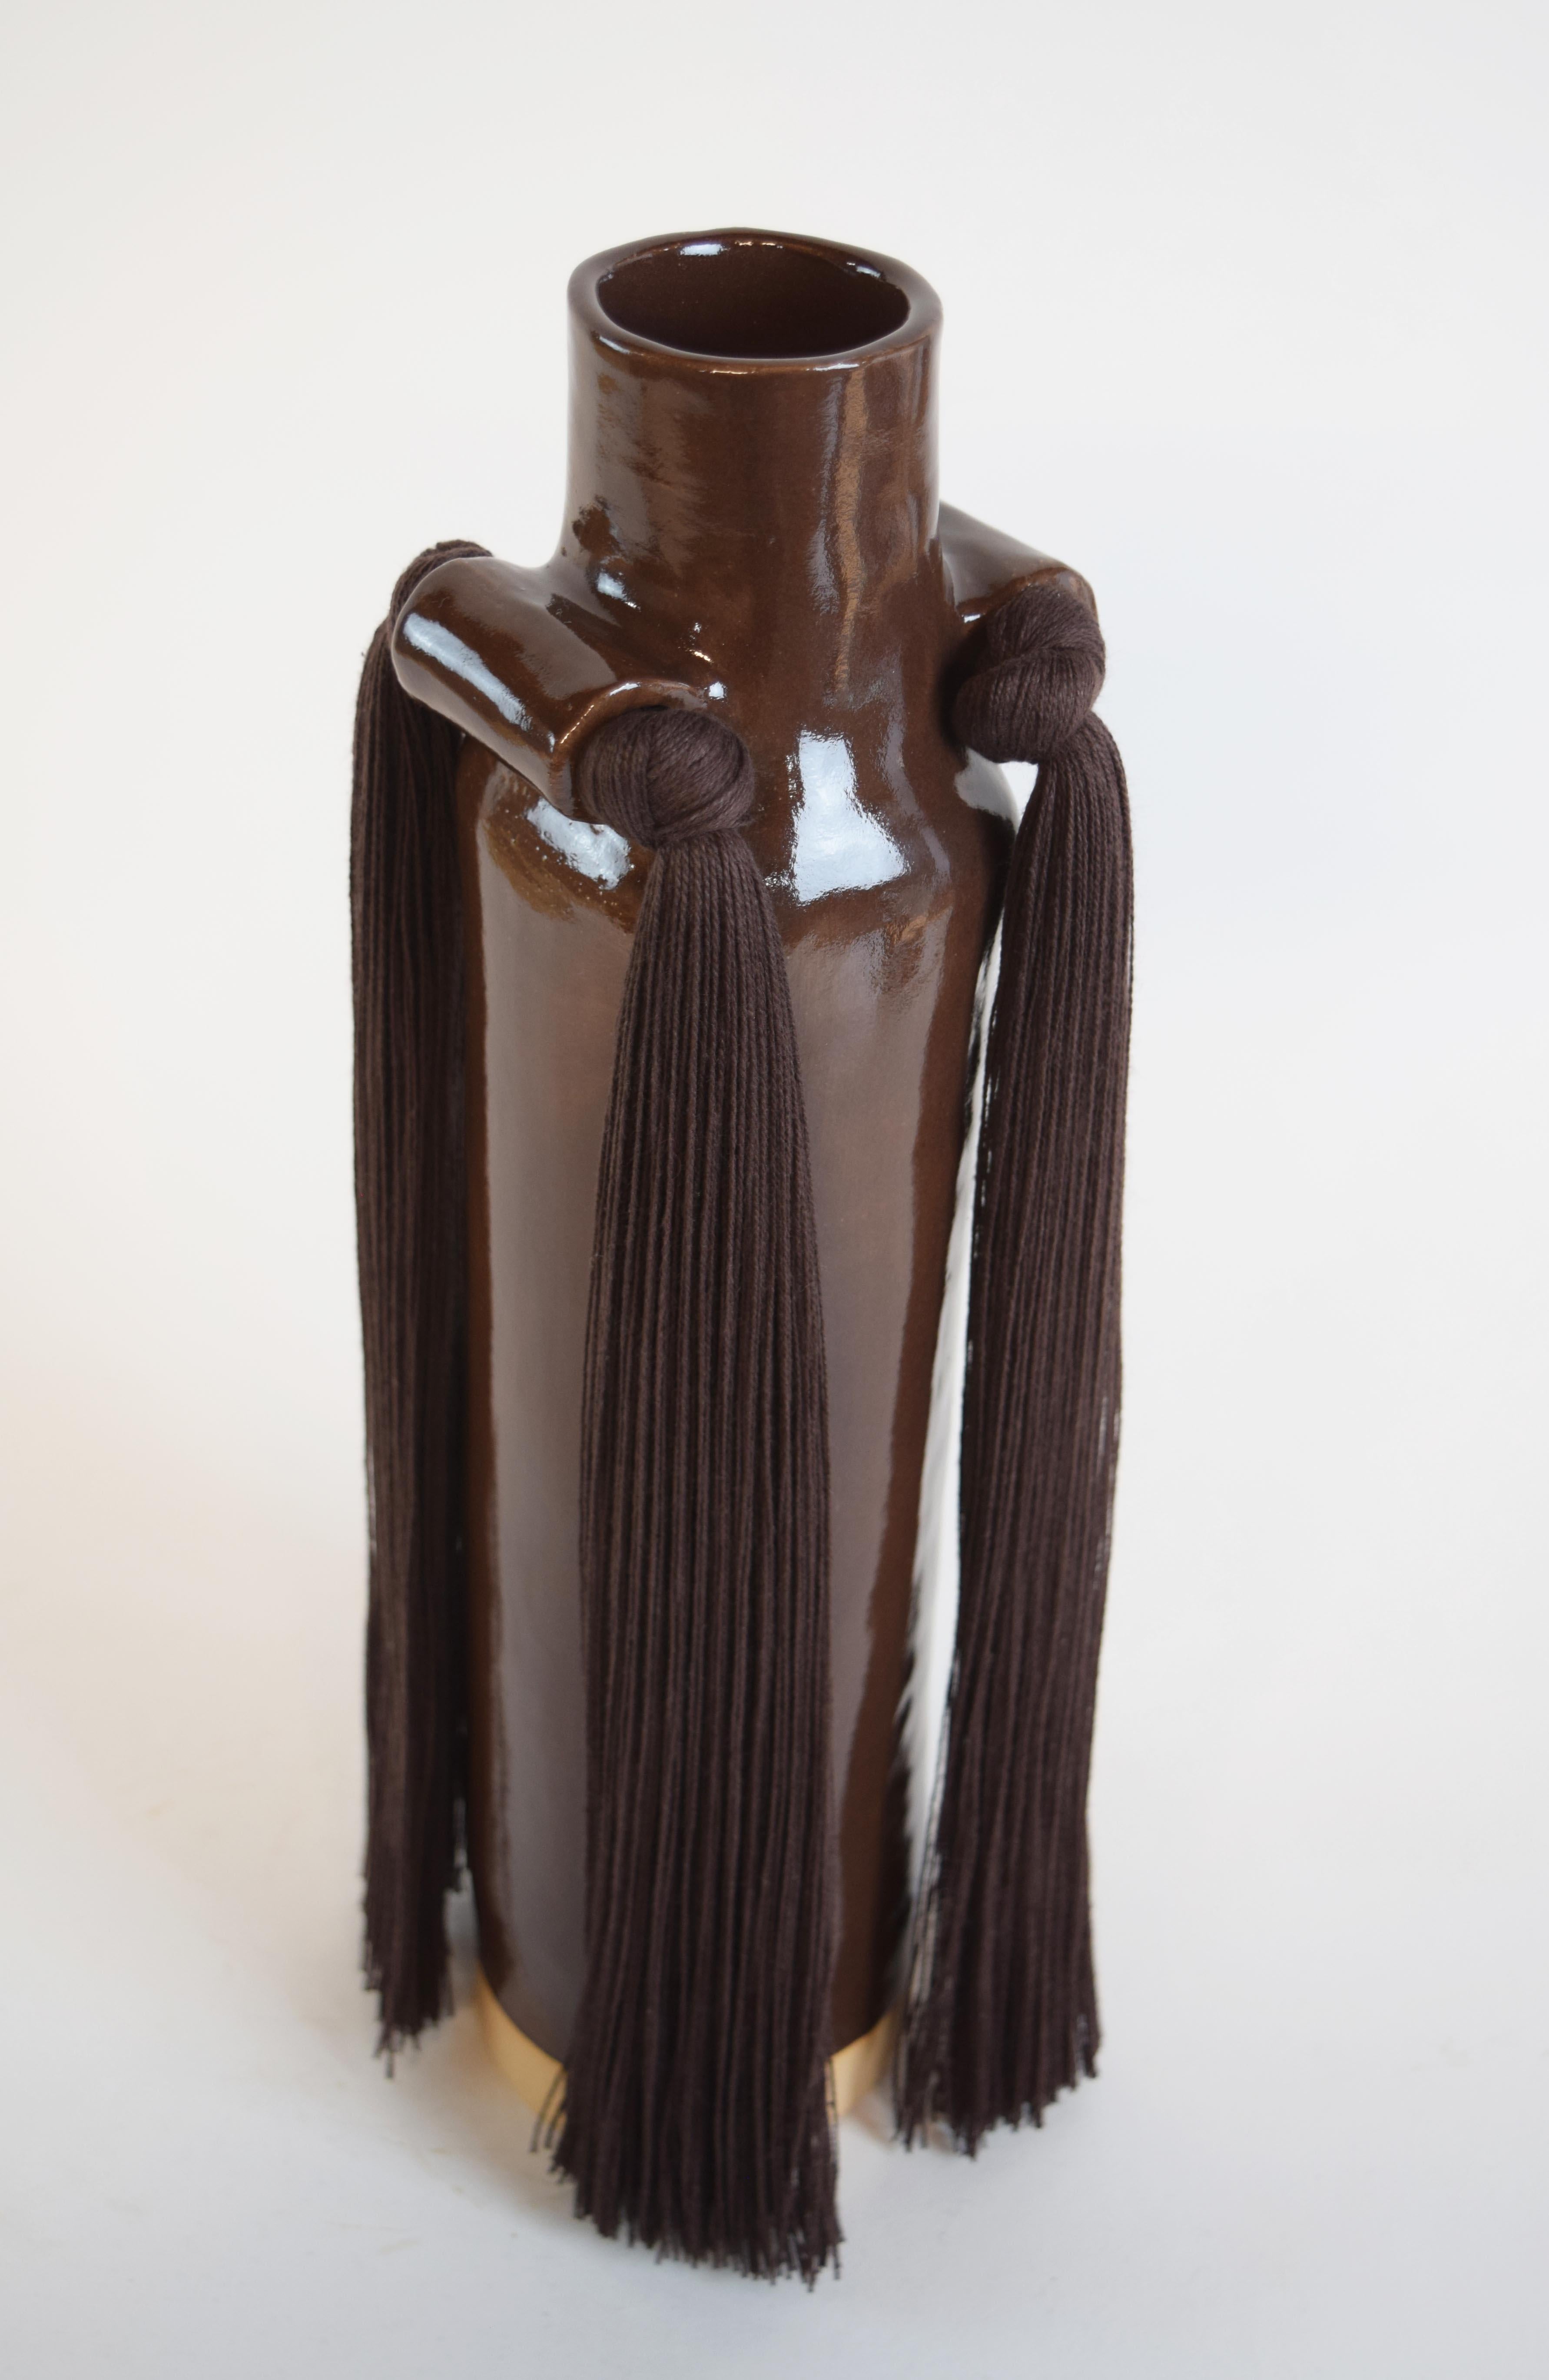 Hand-Knotted Handmade Ceramic Vase #703 in Brown Glaze with Dark Brown Cotton Fringe Detail For Sale